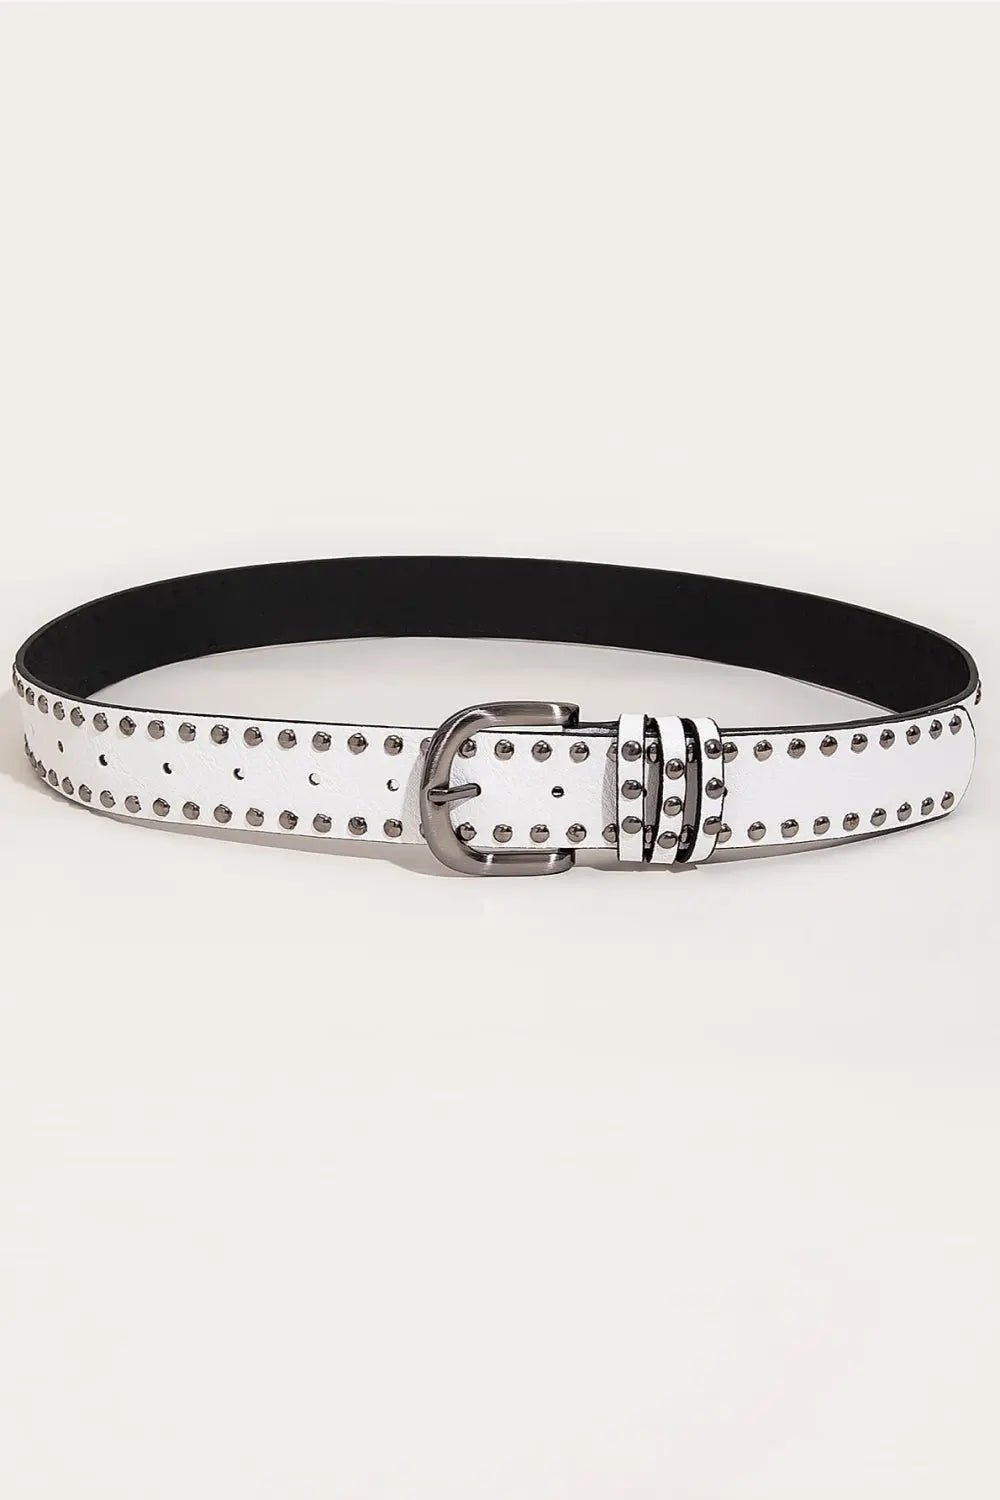 LEATHER STUDDED BELT FOR WOMENS - MeadeuxLEATHER STUDDED BELT FOR WOMENSAccessoriesMeadeux